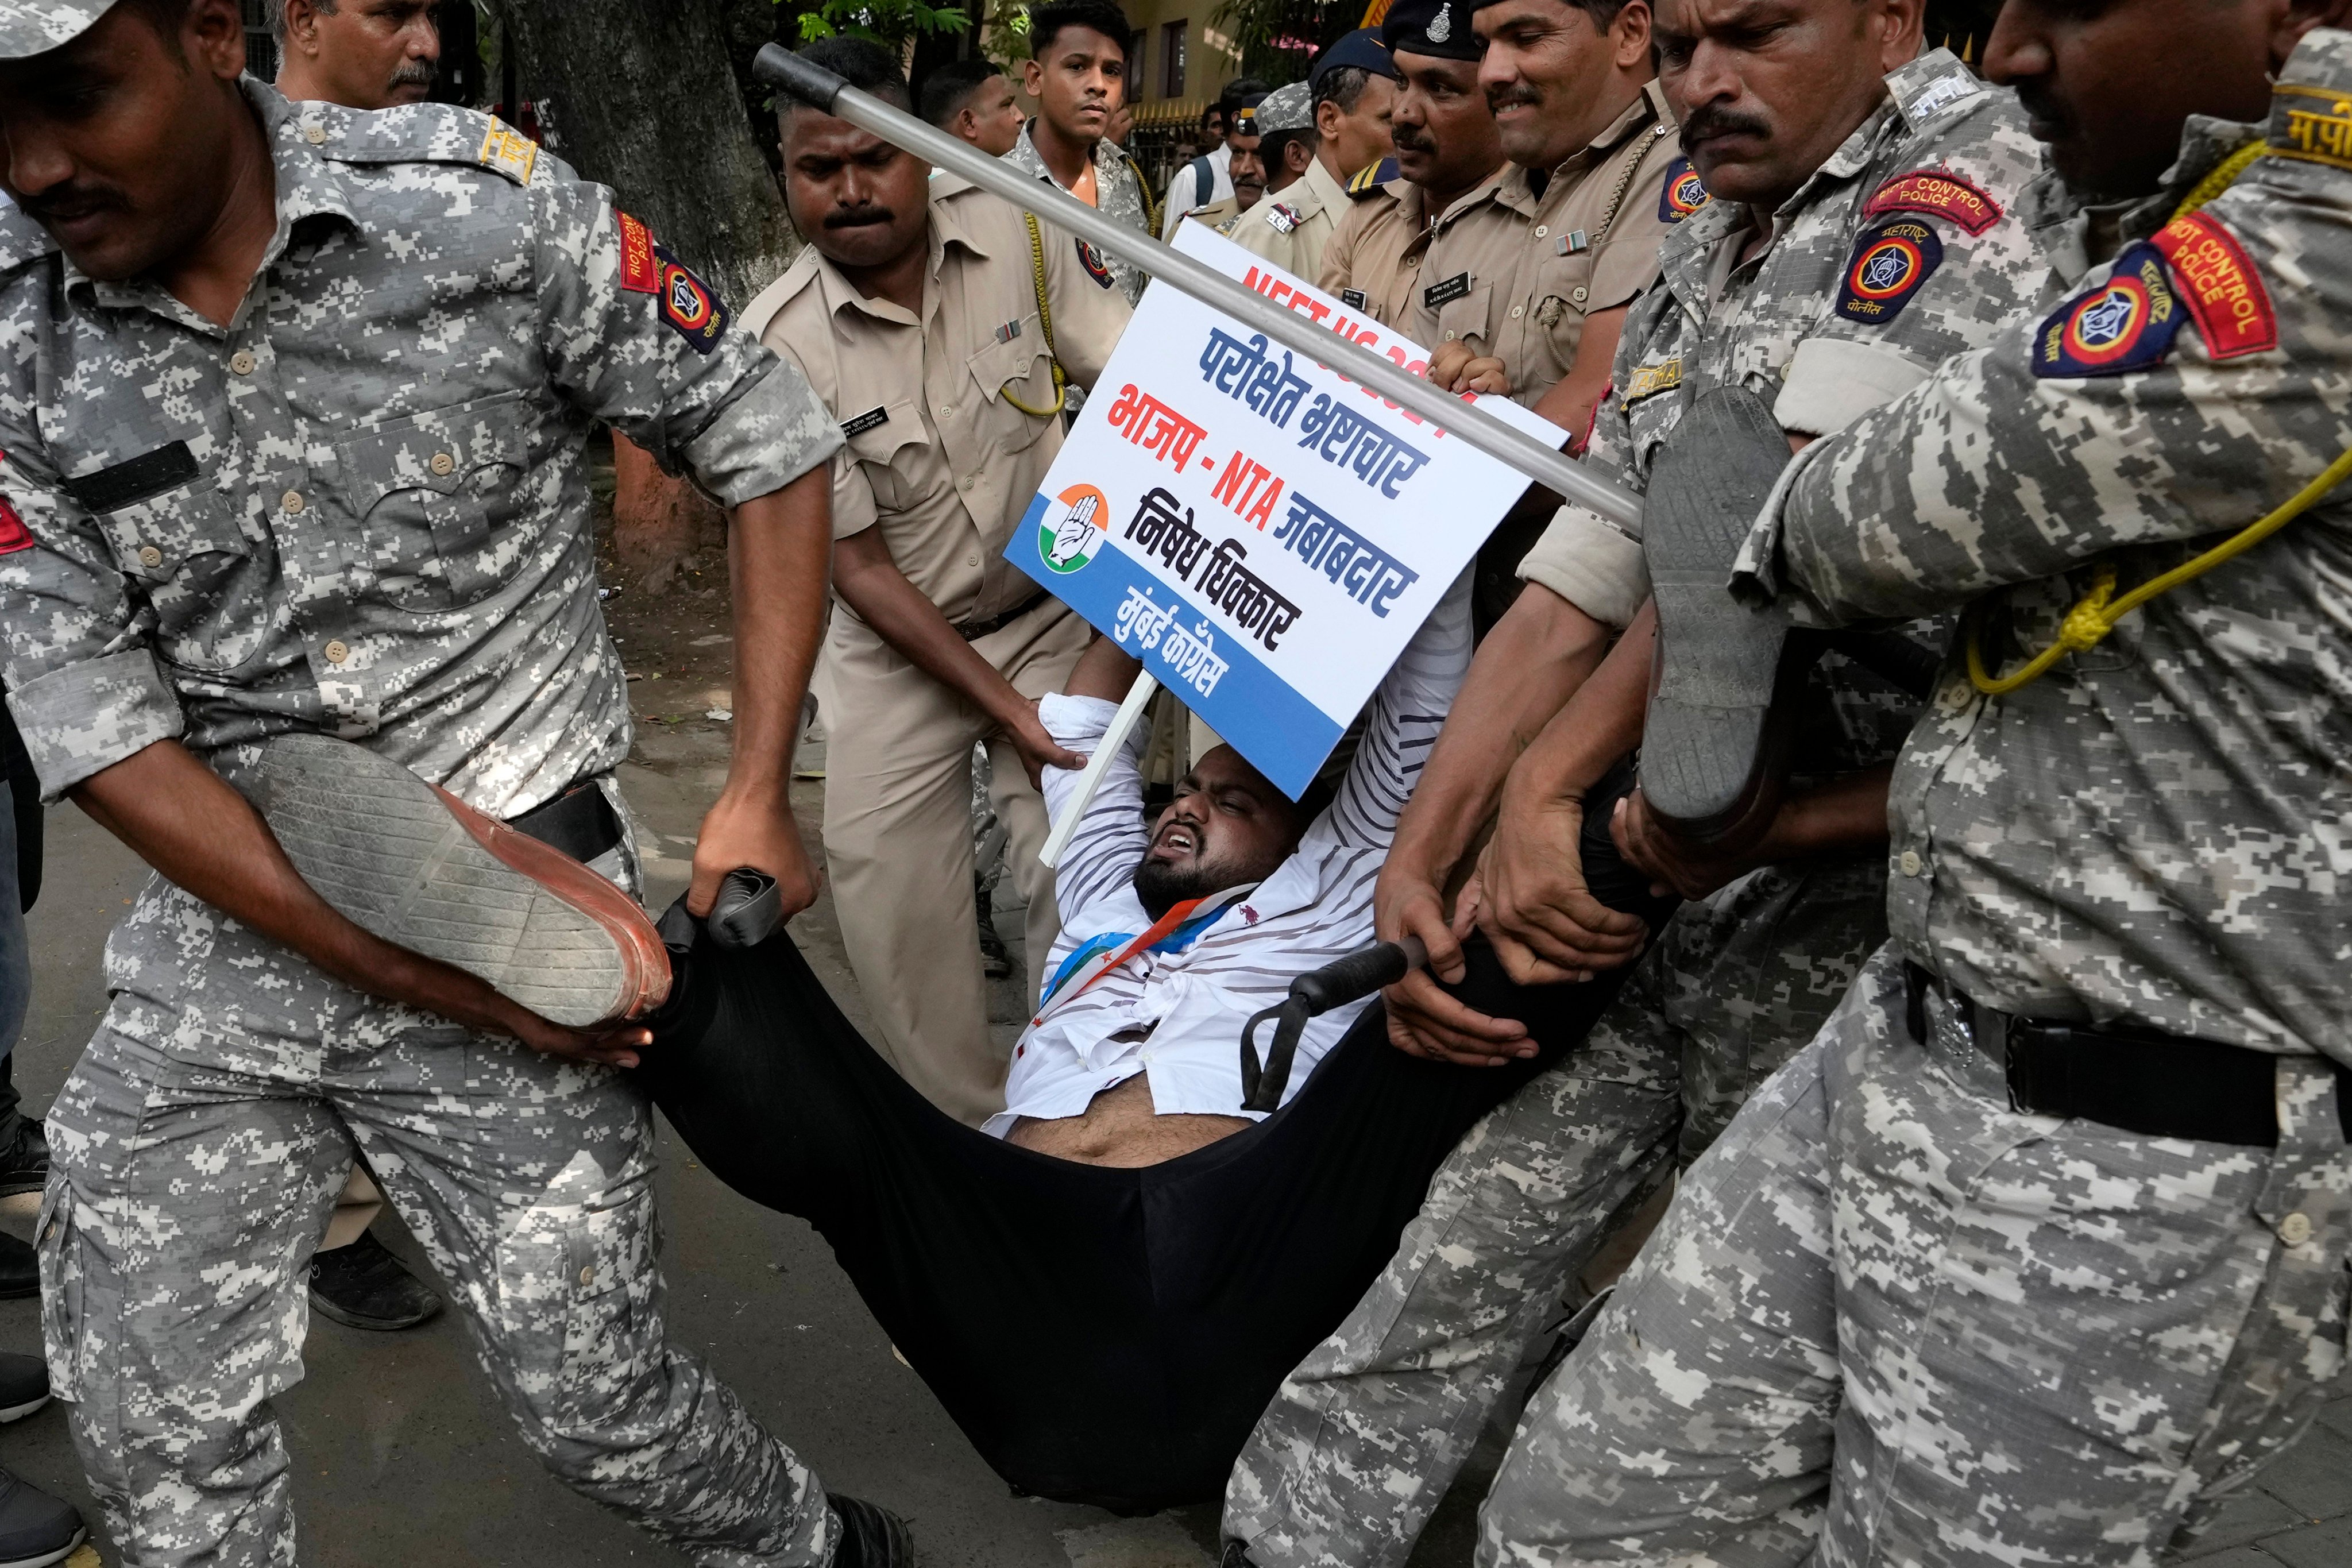 Police officials detain a Congress party worker who held a demonstration to demand justice for students affected by the alleged irregularities in the National Eligibility cum Entrance Examination (NEET) in Mumbai, India on June 21. Photo: AP